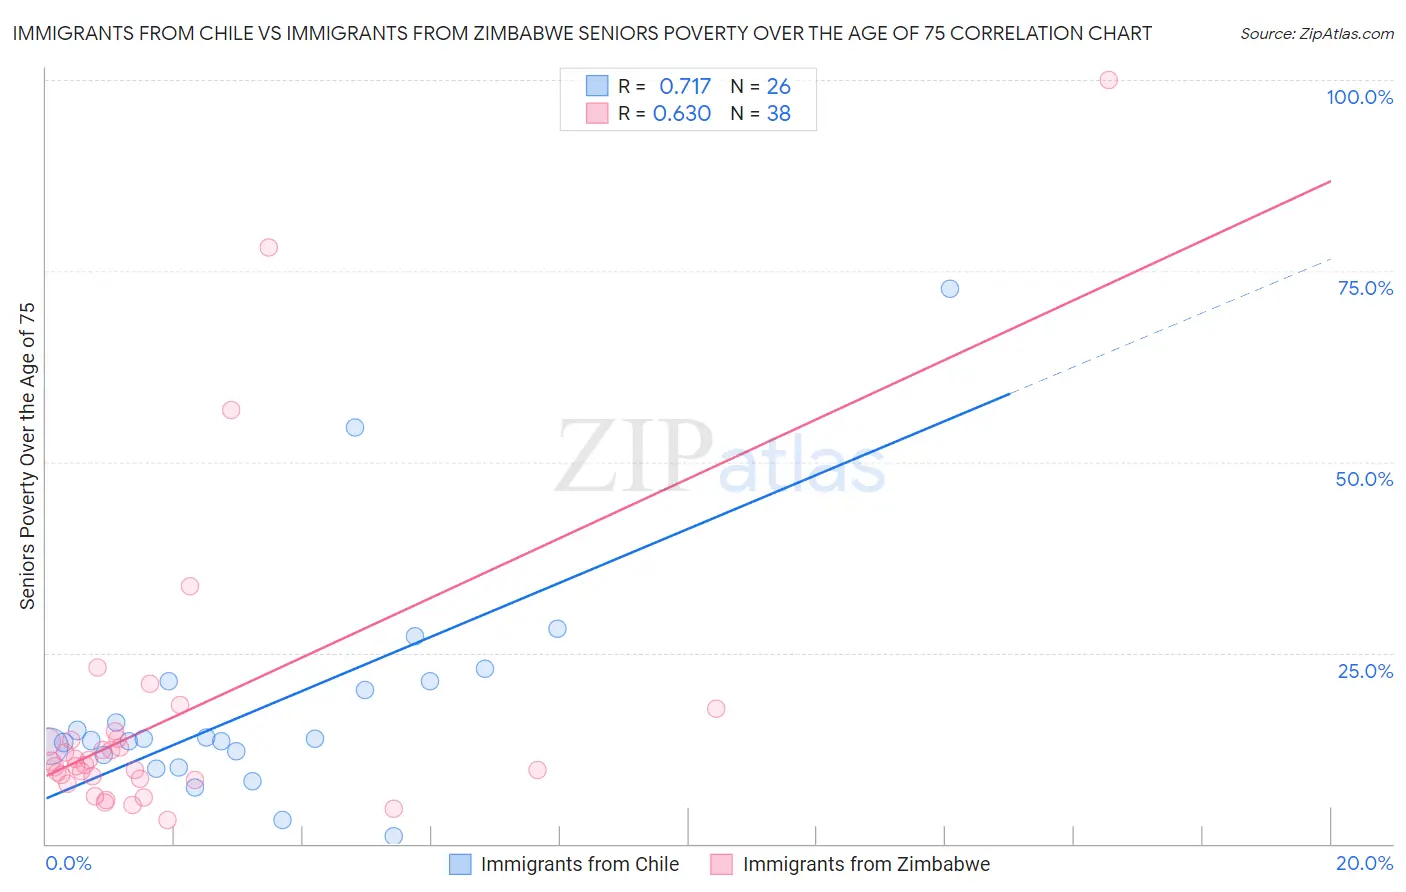 Immigrants from Chile vs Immigrants from Zimbabwe Seniors Poverty Over the Age of 75